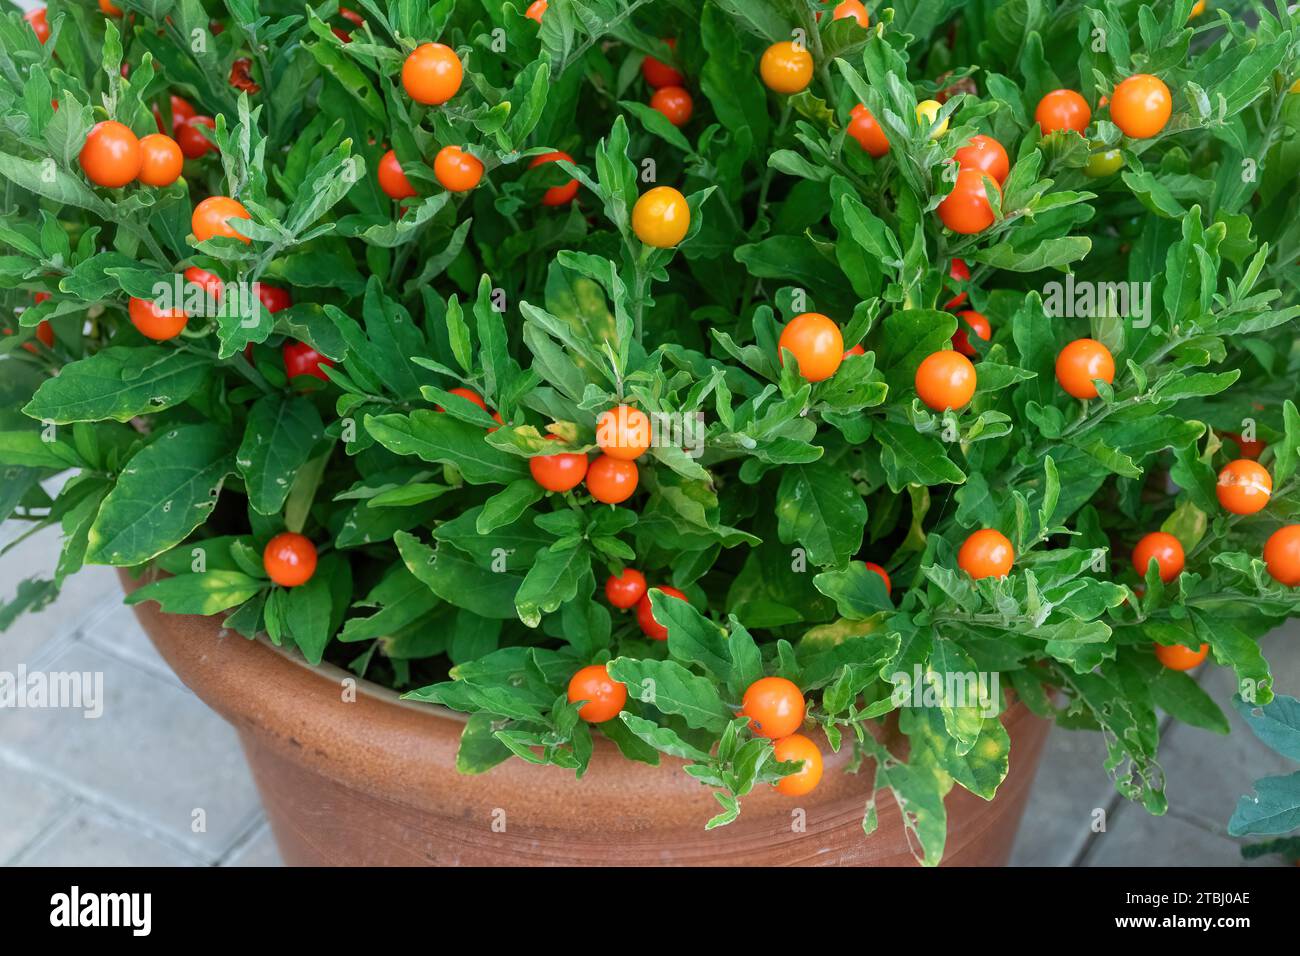 Solanum pseudocapsicum 'Thurino' plant with orange fruits or berries in a pot, also called Christmas cherry or Madeira winter cherry Stock Photo